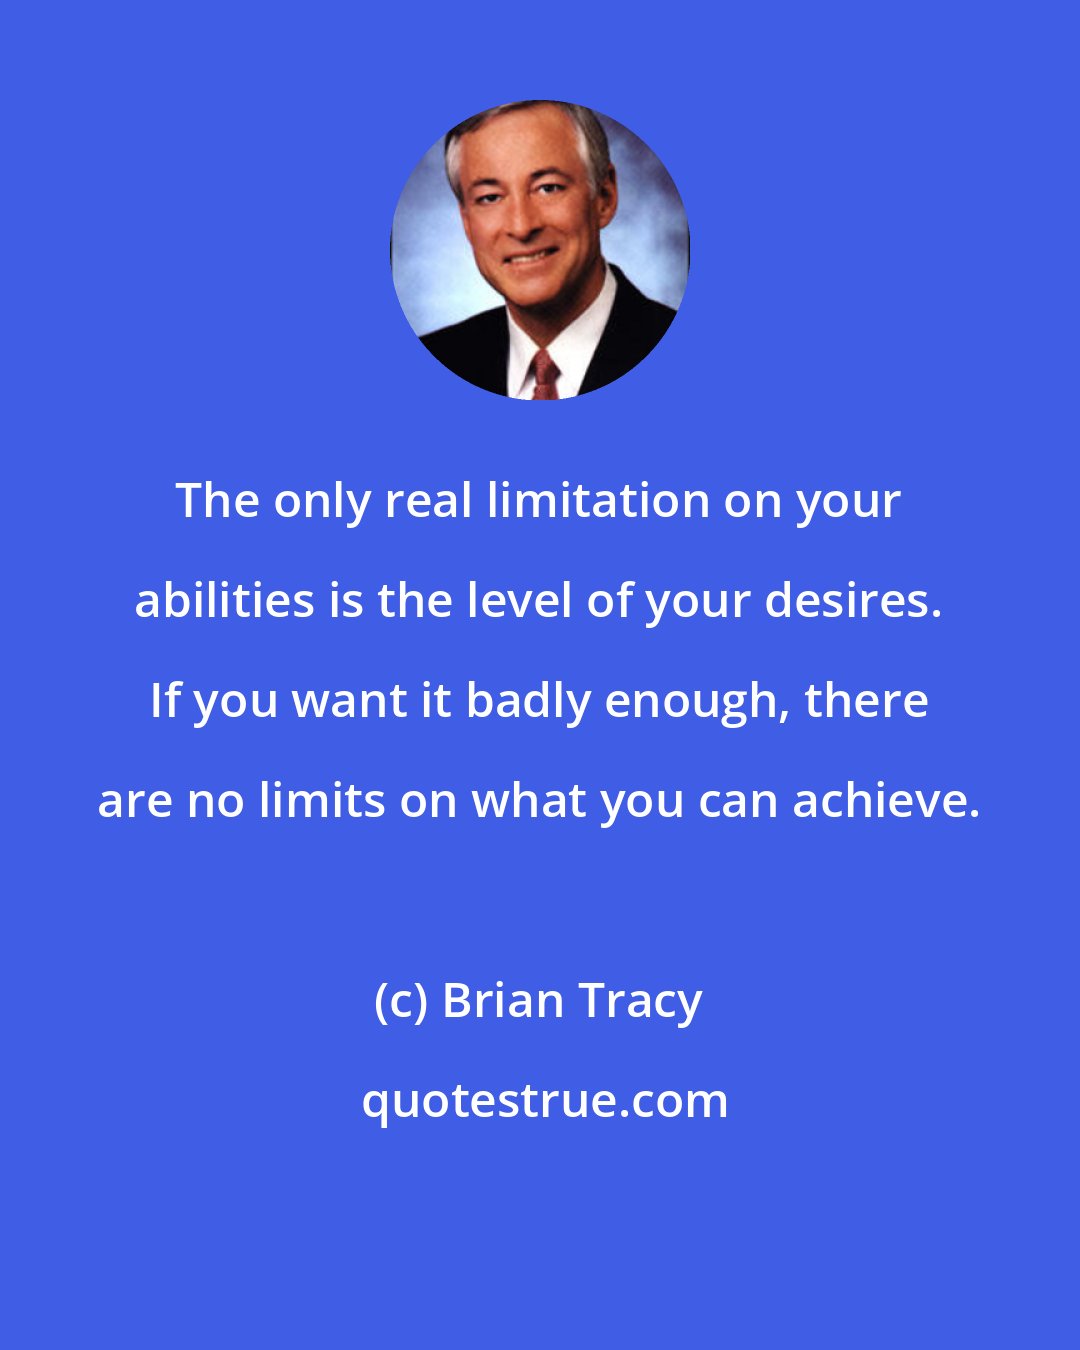 Brian Tracy: The only real limitation on your abilities is the level of your desires. If you want it badly enough, there are no limits on what you can achieve.